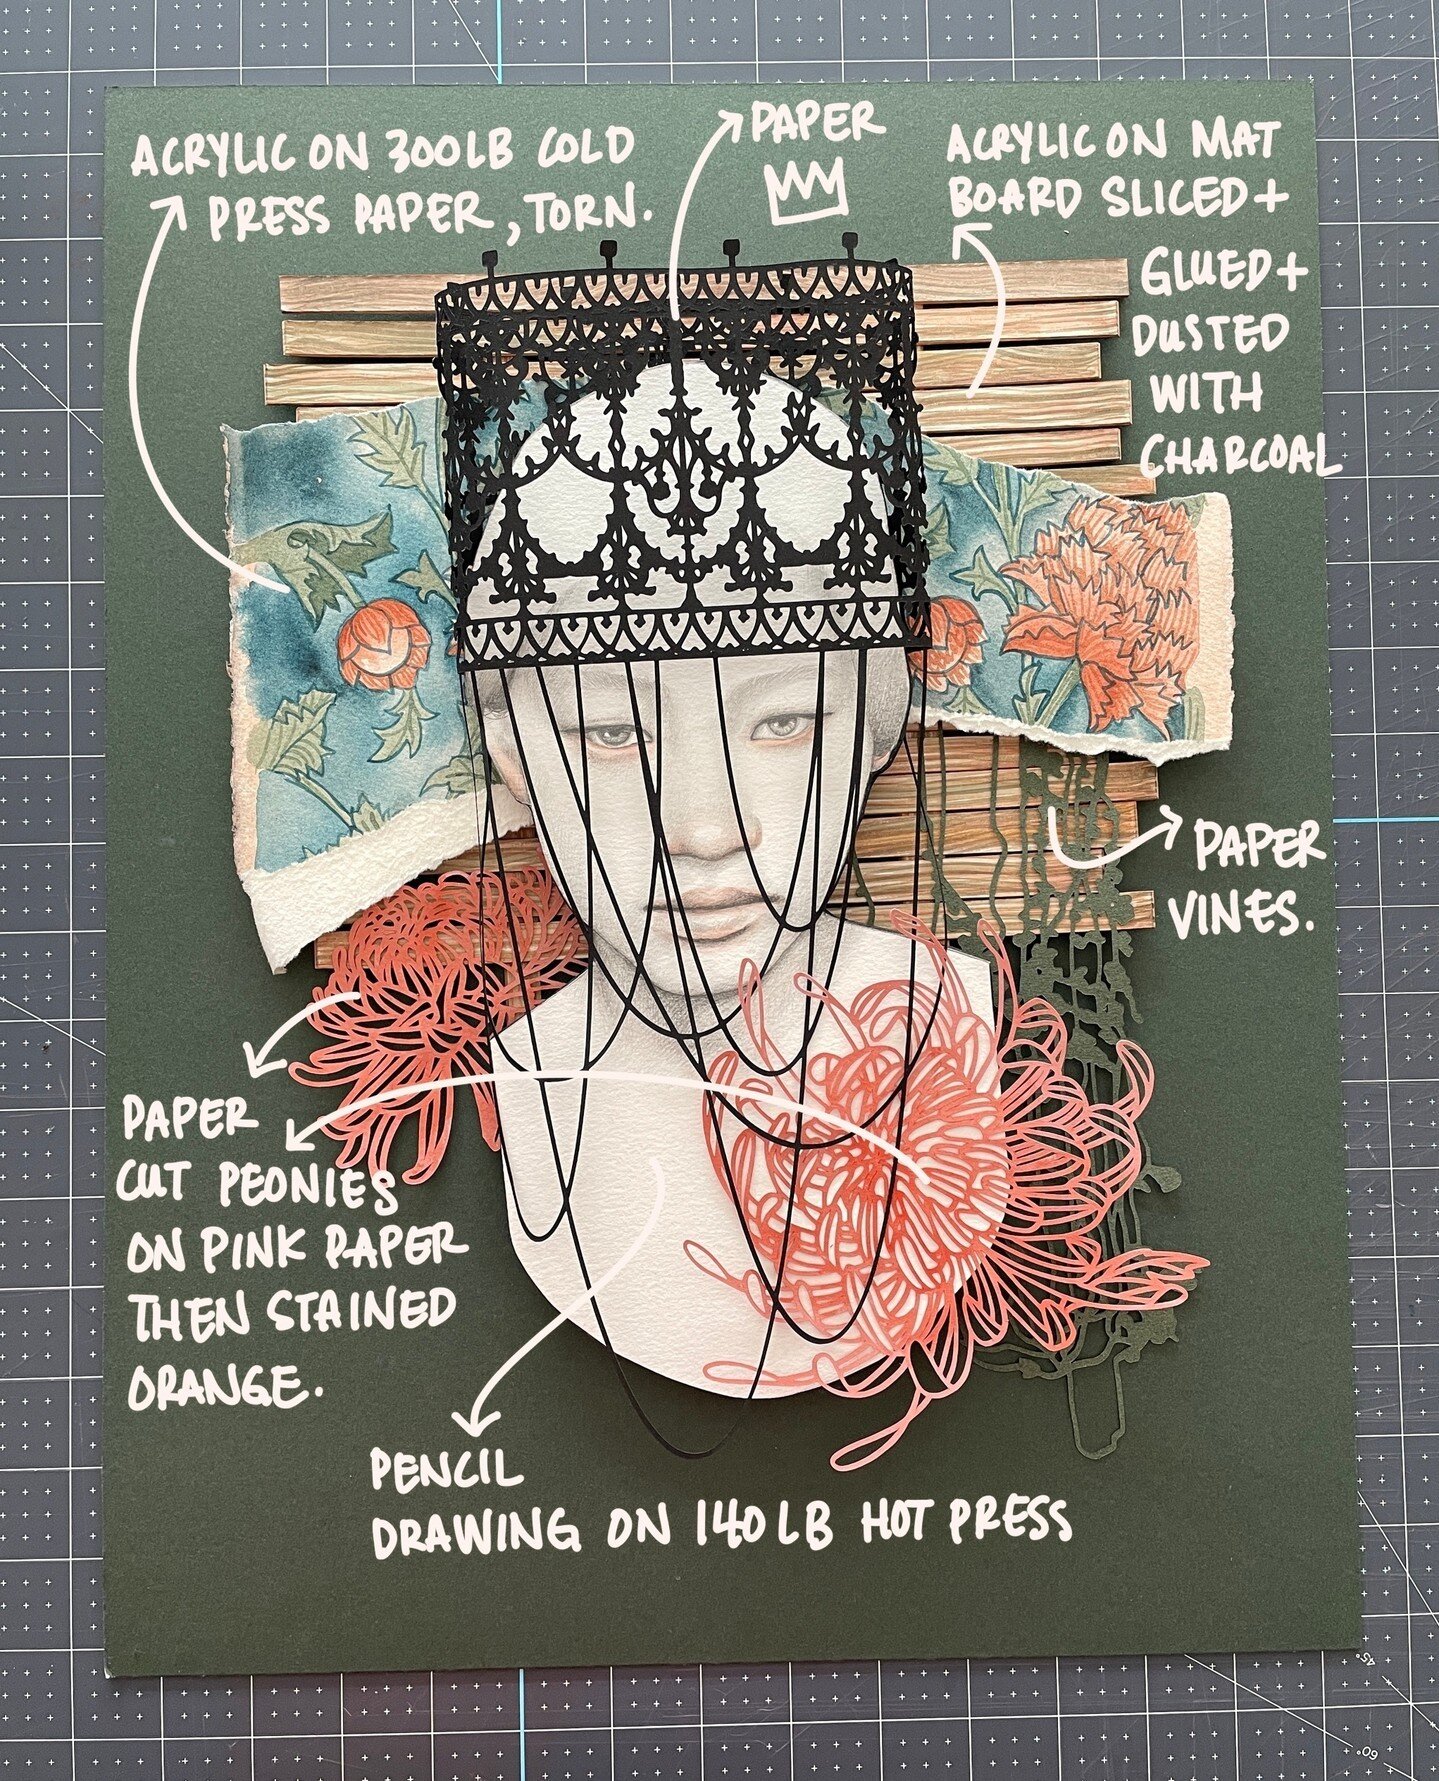 Day 4 of #amonthinpaper brought to you by @paperartistcollective : creative process! ⁠
⁠
I thought I'd mark up a collage to show you the different layers involved in a single piece. This collage isn't even glued down yet because I save that till the 